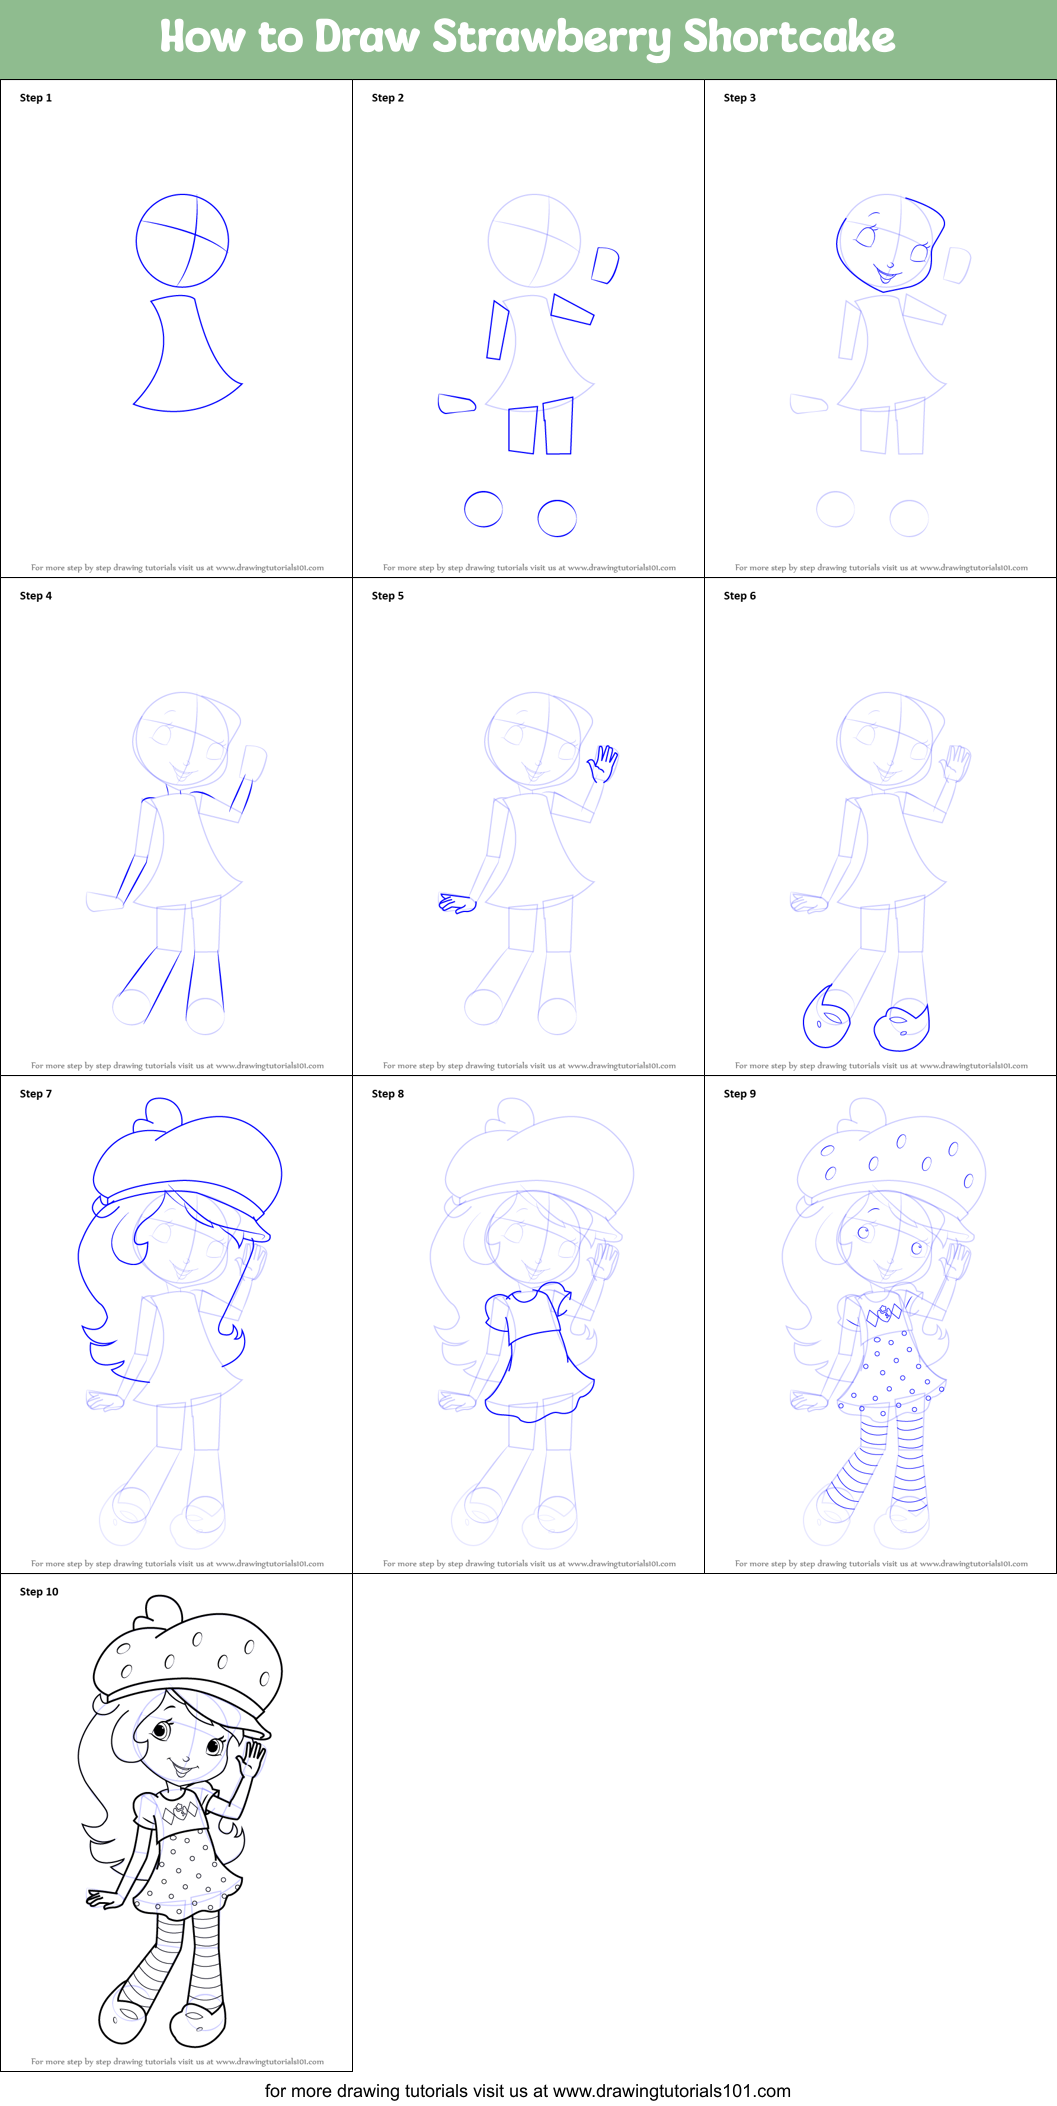 How to Draw Strawberry Shortcake printable step by step drawing sheet